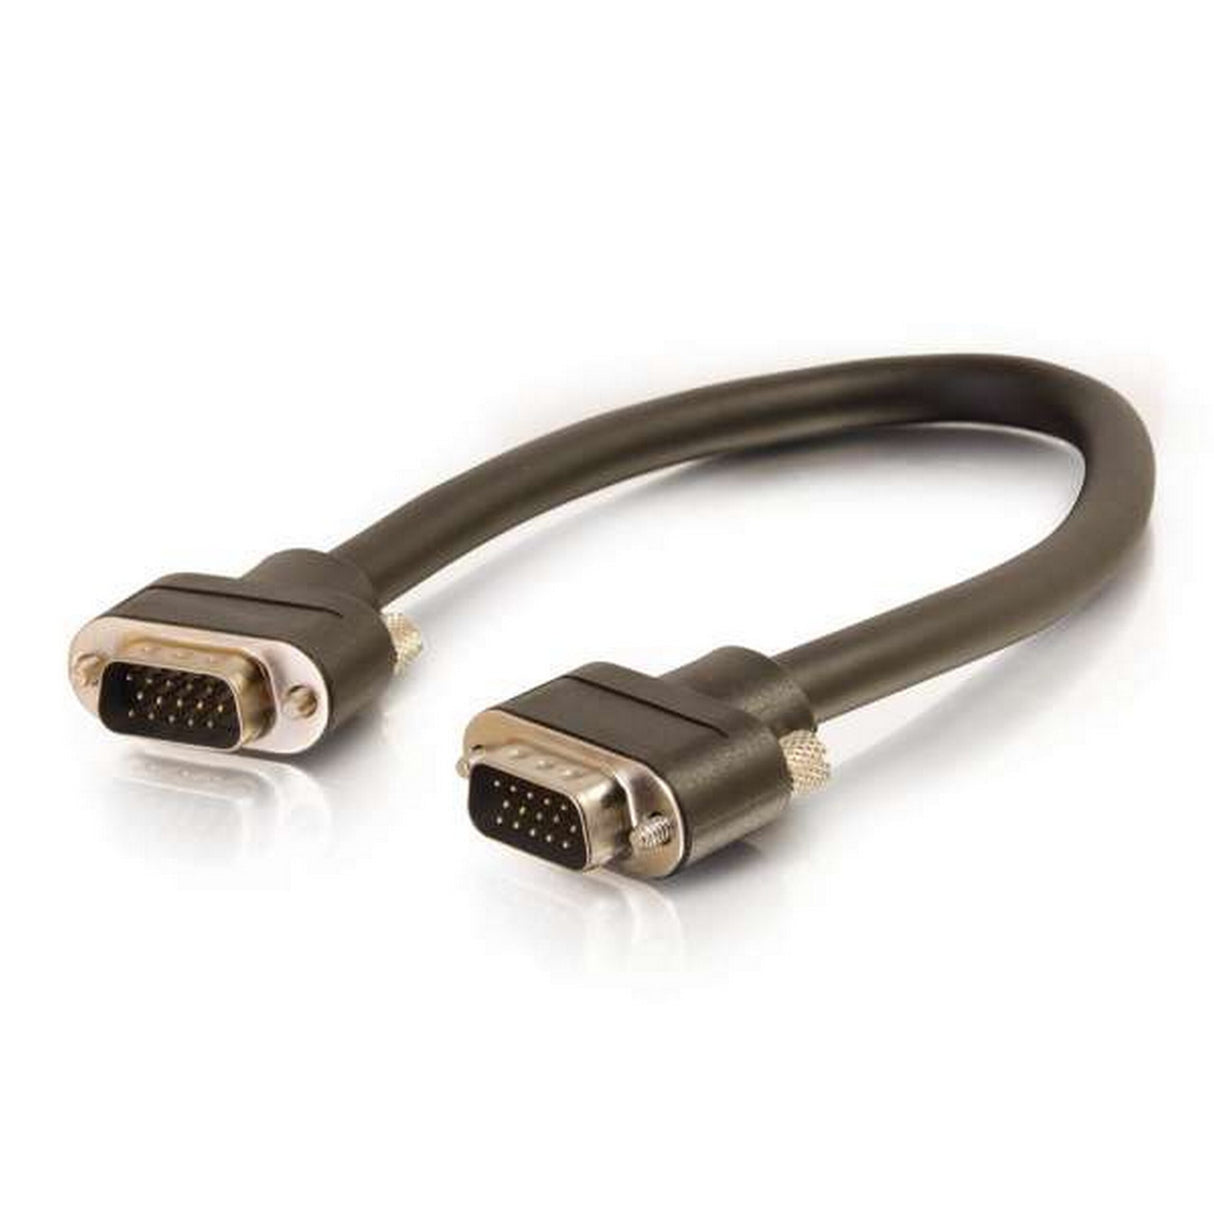 C2G Select VGA Video Cable Male to Male, 6 Foot